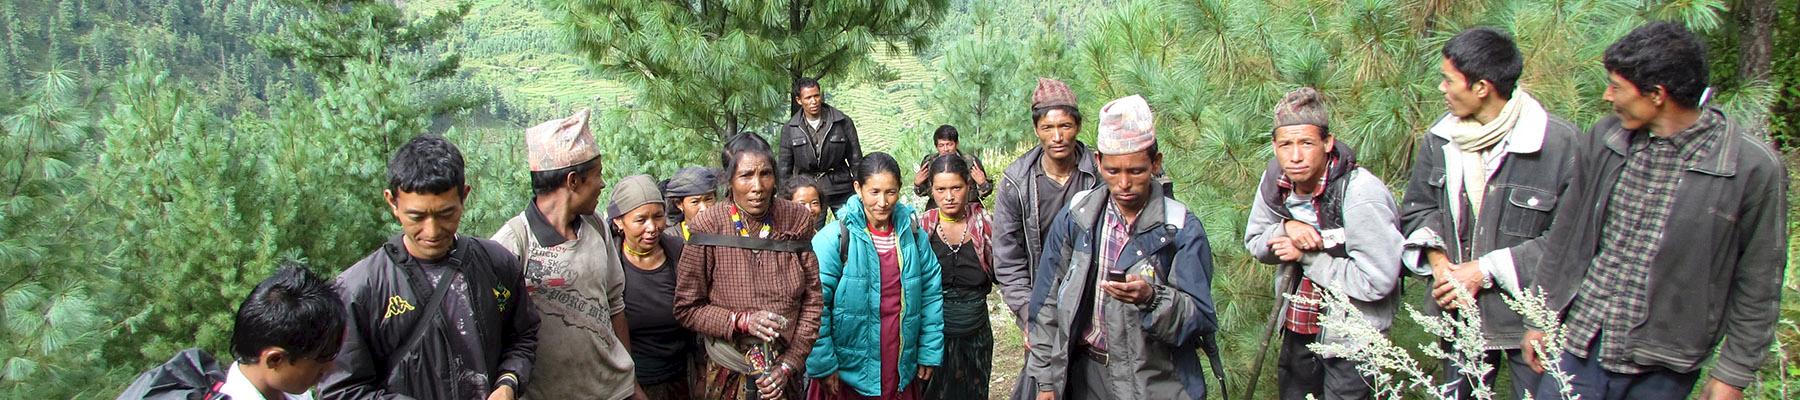 Jatamansi harvesters in the Alpine forests of Nepal. Photo: ANSAB